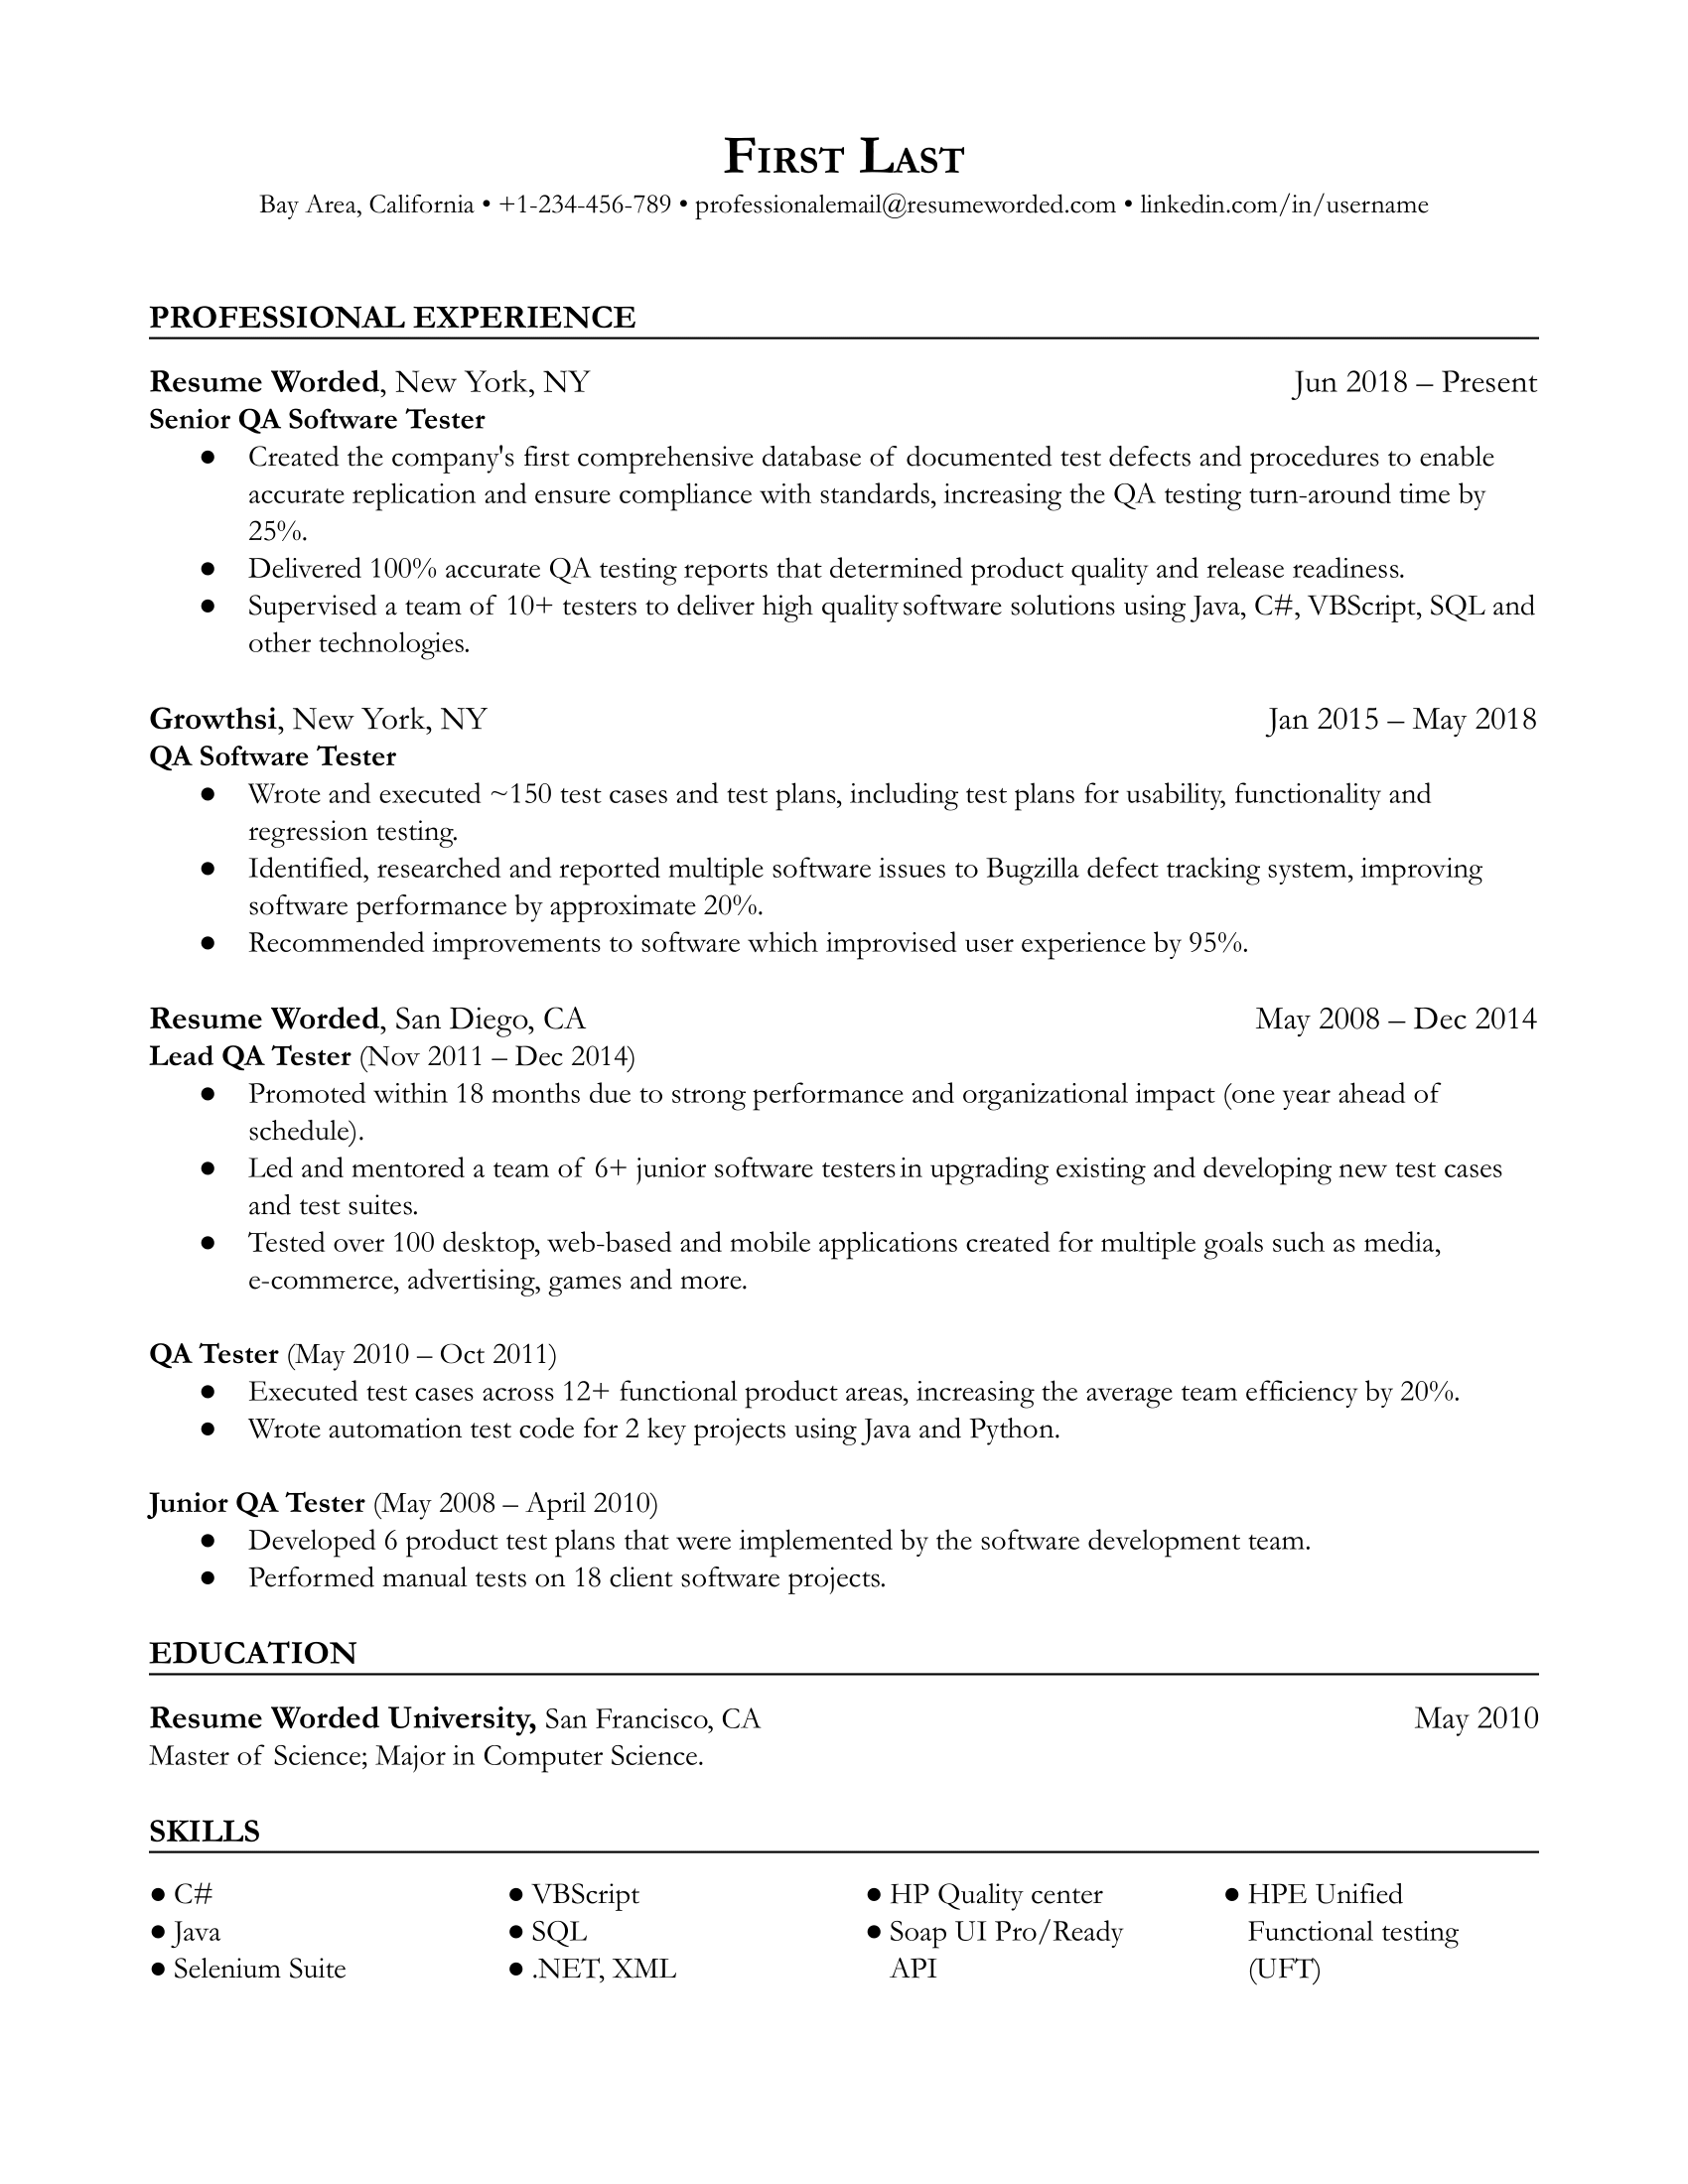 An example of a QA software tester's resume, which emphasizes key software experiences